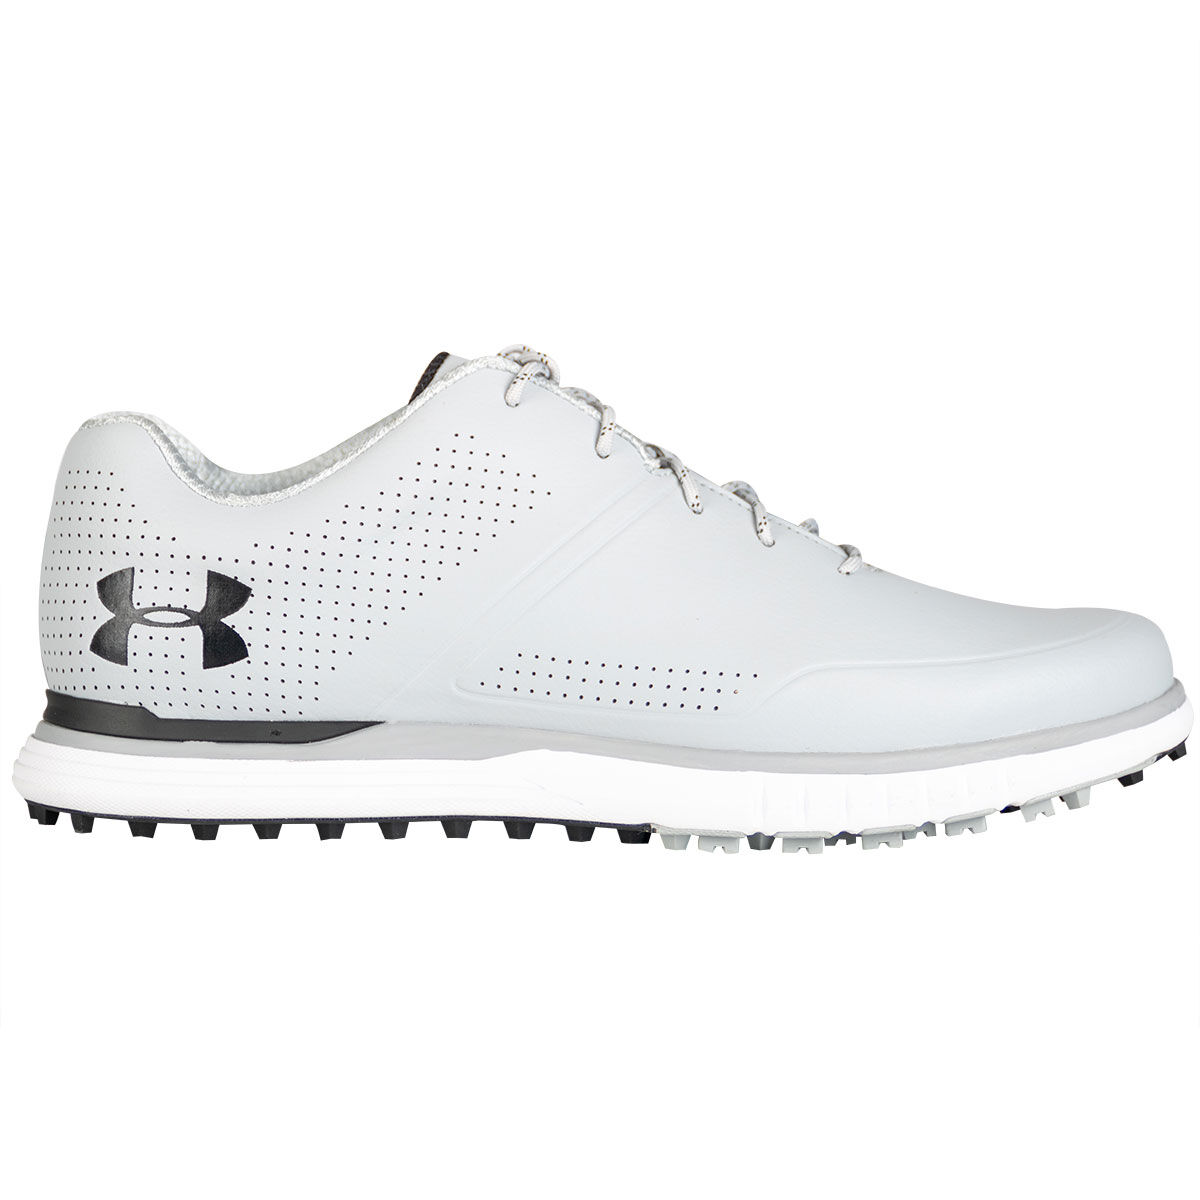 Under Armour Medal Shoes from american golf